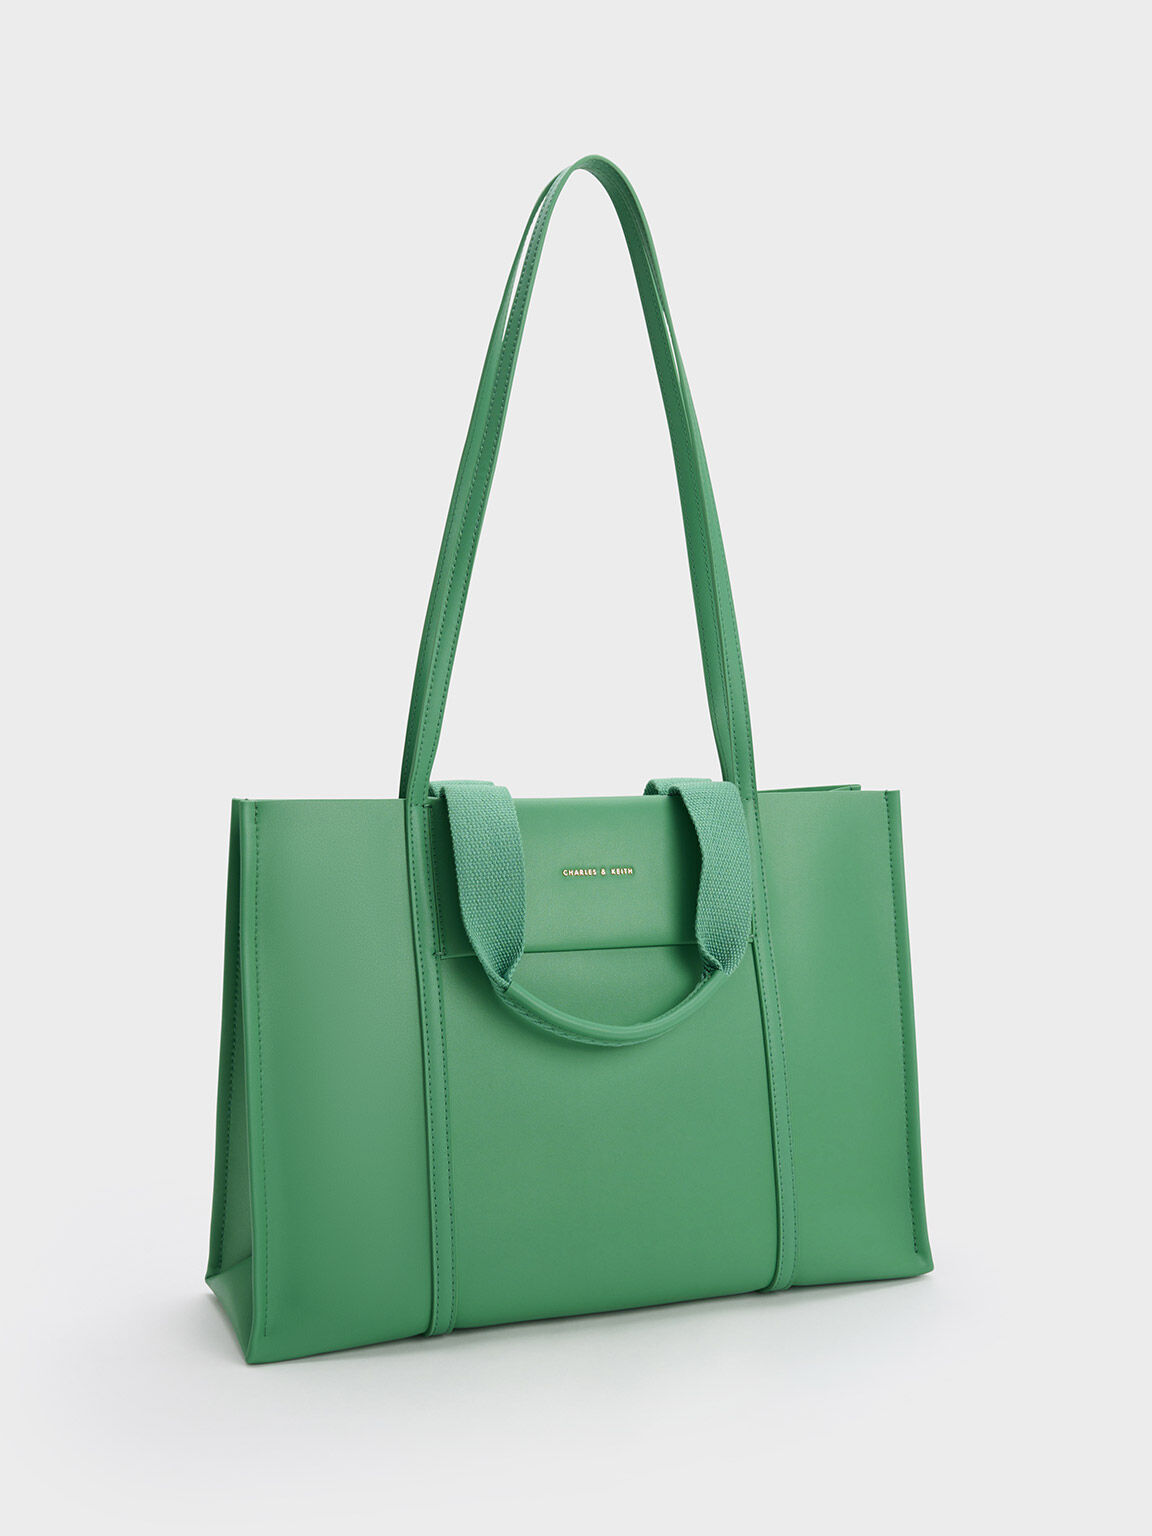 5 Hunter Green Bags To Love Under $100